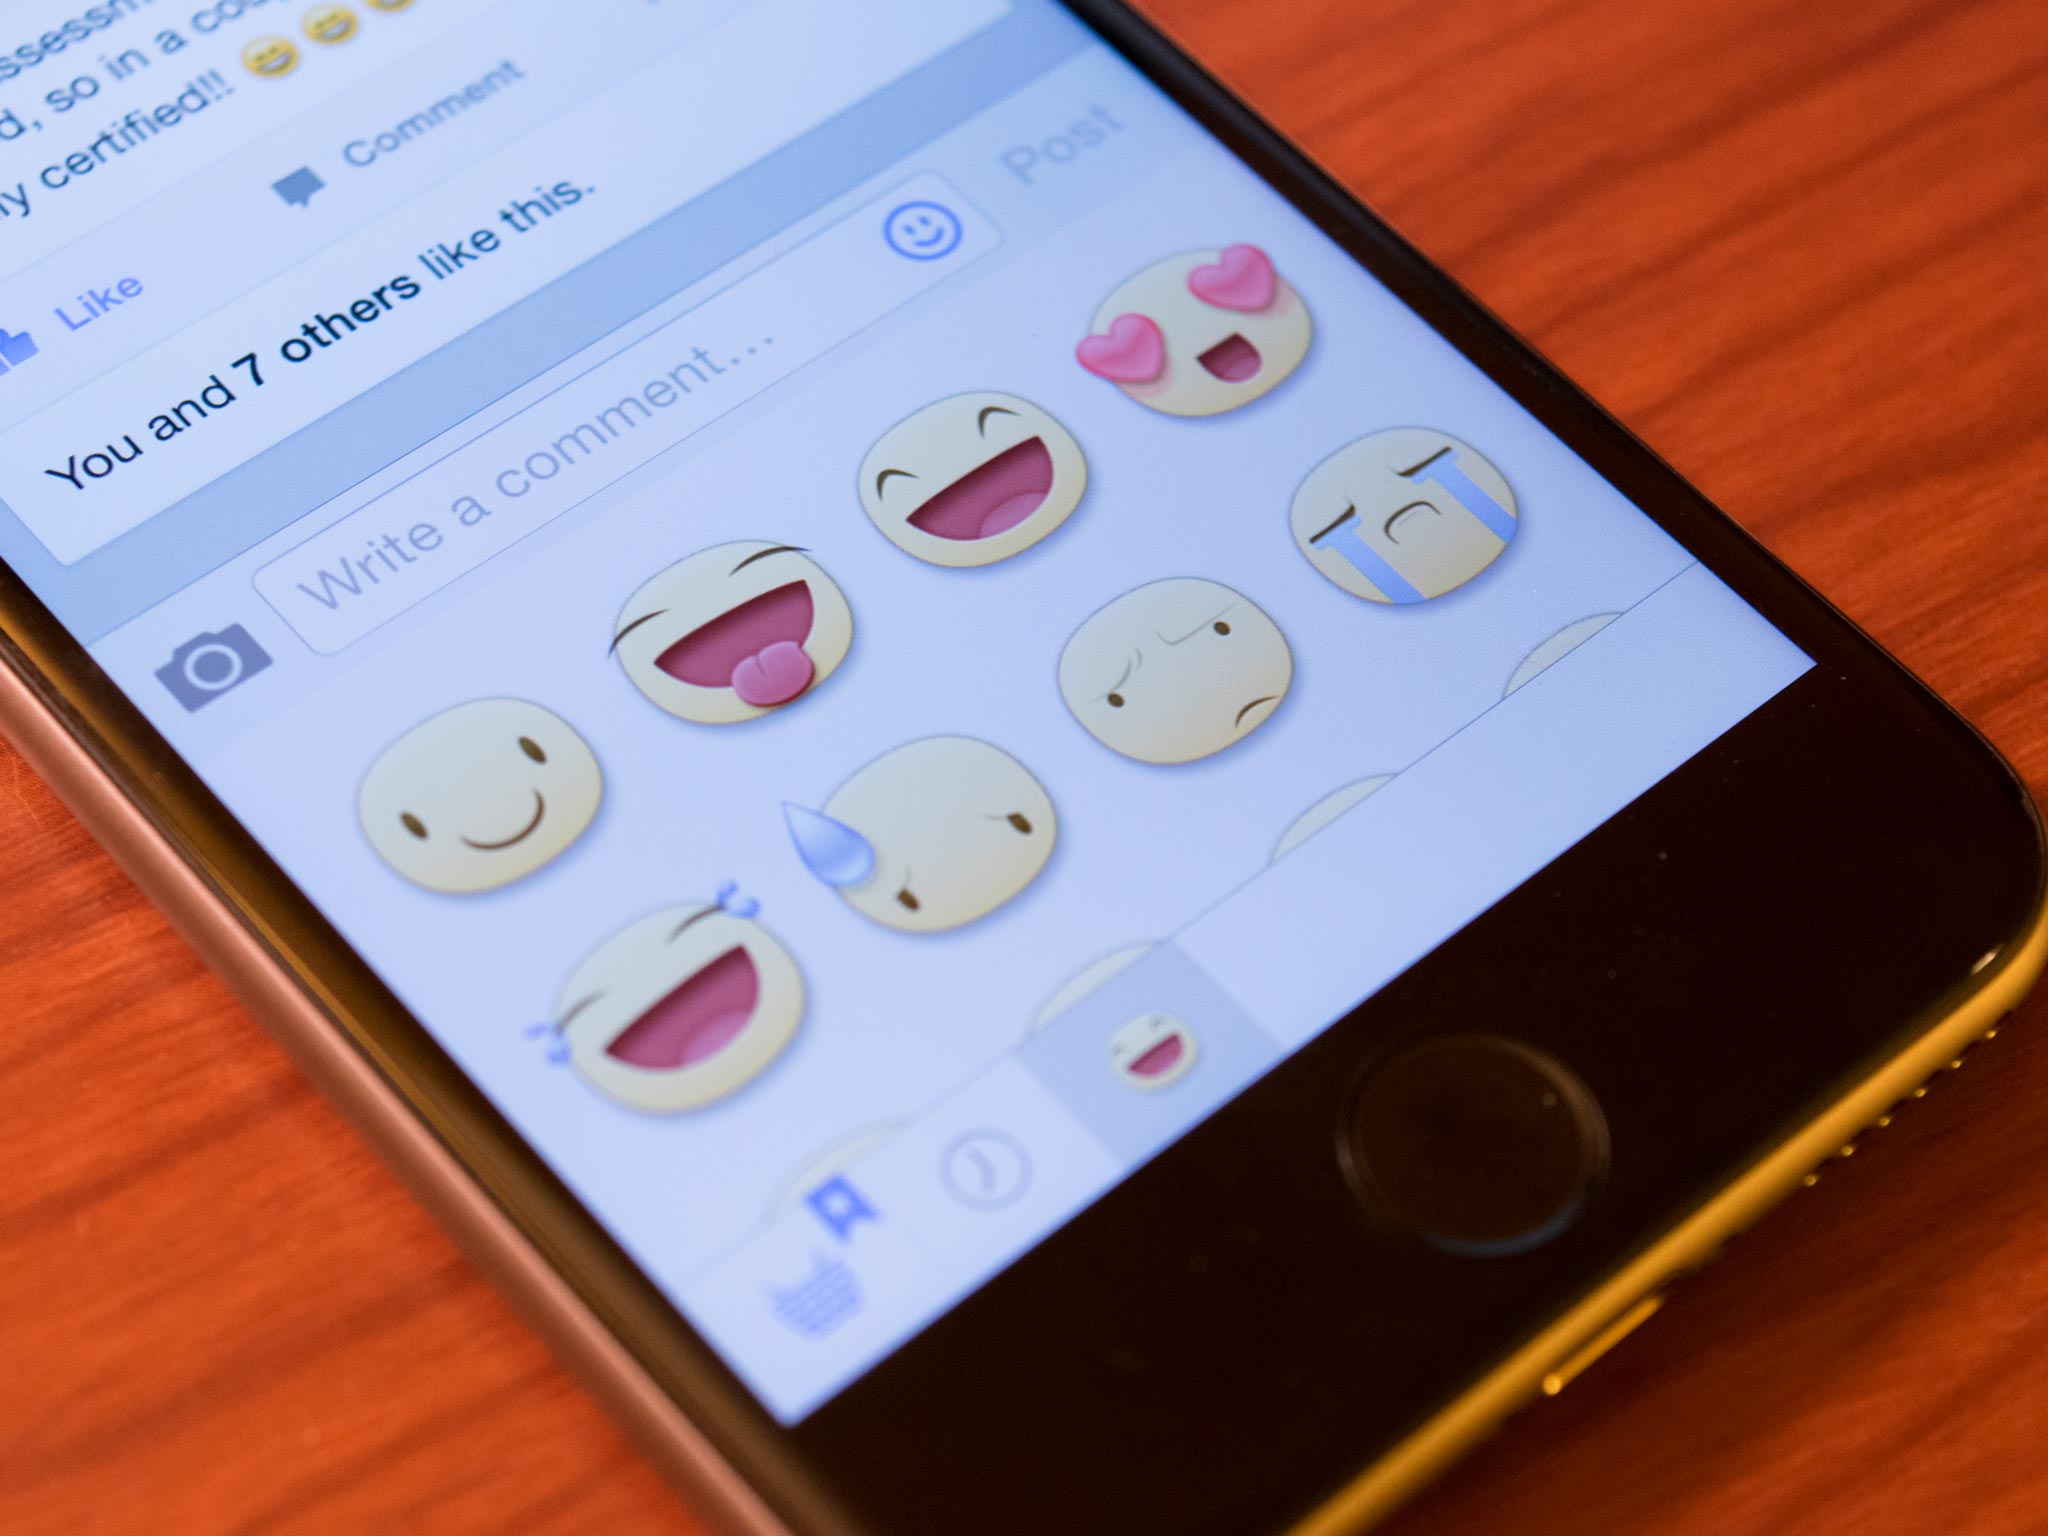 Facebook now lets you comment with stickers